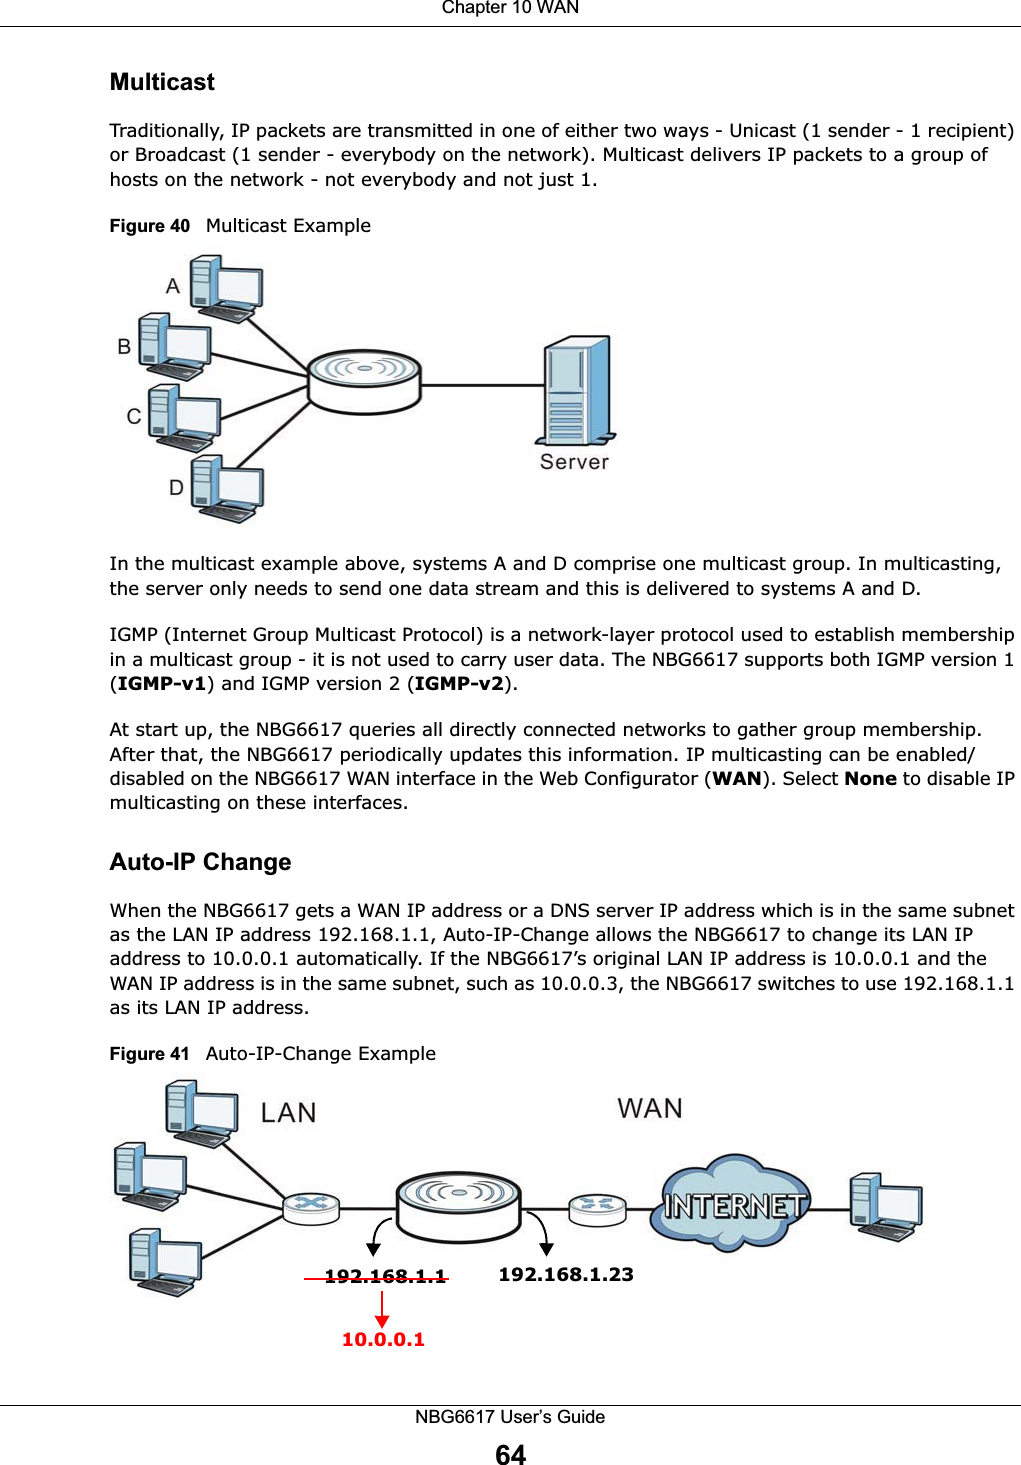 Chapter 10 WANNBG6617 User’s Guide64MulticastTraditionally, IP packets are transmitted in one of either two ways - Unicast (1 sender - 1 recipient) or Broadcast (1 sender - everybody on the network). Multicast delivers IP packets to a group of hosts on the network - not everybody and not just 1. Figure 40   Multicast ExampleIn the multicast example above, systems A and D comprise one multicast group. In multicasting, the server only needs to send one data stream and this is delivered to systems A and D. IGMP (Internet Group Multicast Protocol) is a network-layer protocol used to establish membership in a multicast group - it is not used to carry user data. The NBG6617 supports both IGMP version 1 (IGMP-v1) and IGMP version 2 (IGMP-v2). At start up, the NBG6617 queries all directly connected networks to gather group membership. After that, the NBG6617 periodically updates this information. IP multicasting can be enabled/disabled on the NBG6617 WAN interface in the Web Configurator (WAN). Select None to disable IP multicasting on these interfaces.Auto-IP ChangeWhen the NBG6617 gets a WAN IP address or a DNS server IP address which is in the same subnet as the LAN IP address 192.168.1.1, Auto-IP-Change allows the NBG6617 to change its LAN IP address to 10.0.0.1 automatically. If the NBG6617’s original LAN IP address is 10.0.0.1 and the WAN IP address is in the same subnet, such as 10.0.0.3, the NBG6617 switches to use 192.168.1.1 as its LAN IP address.Figure 41   Auto-IP-Change Example192.168.1.1 192.168.1.2310.0.0.1